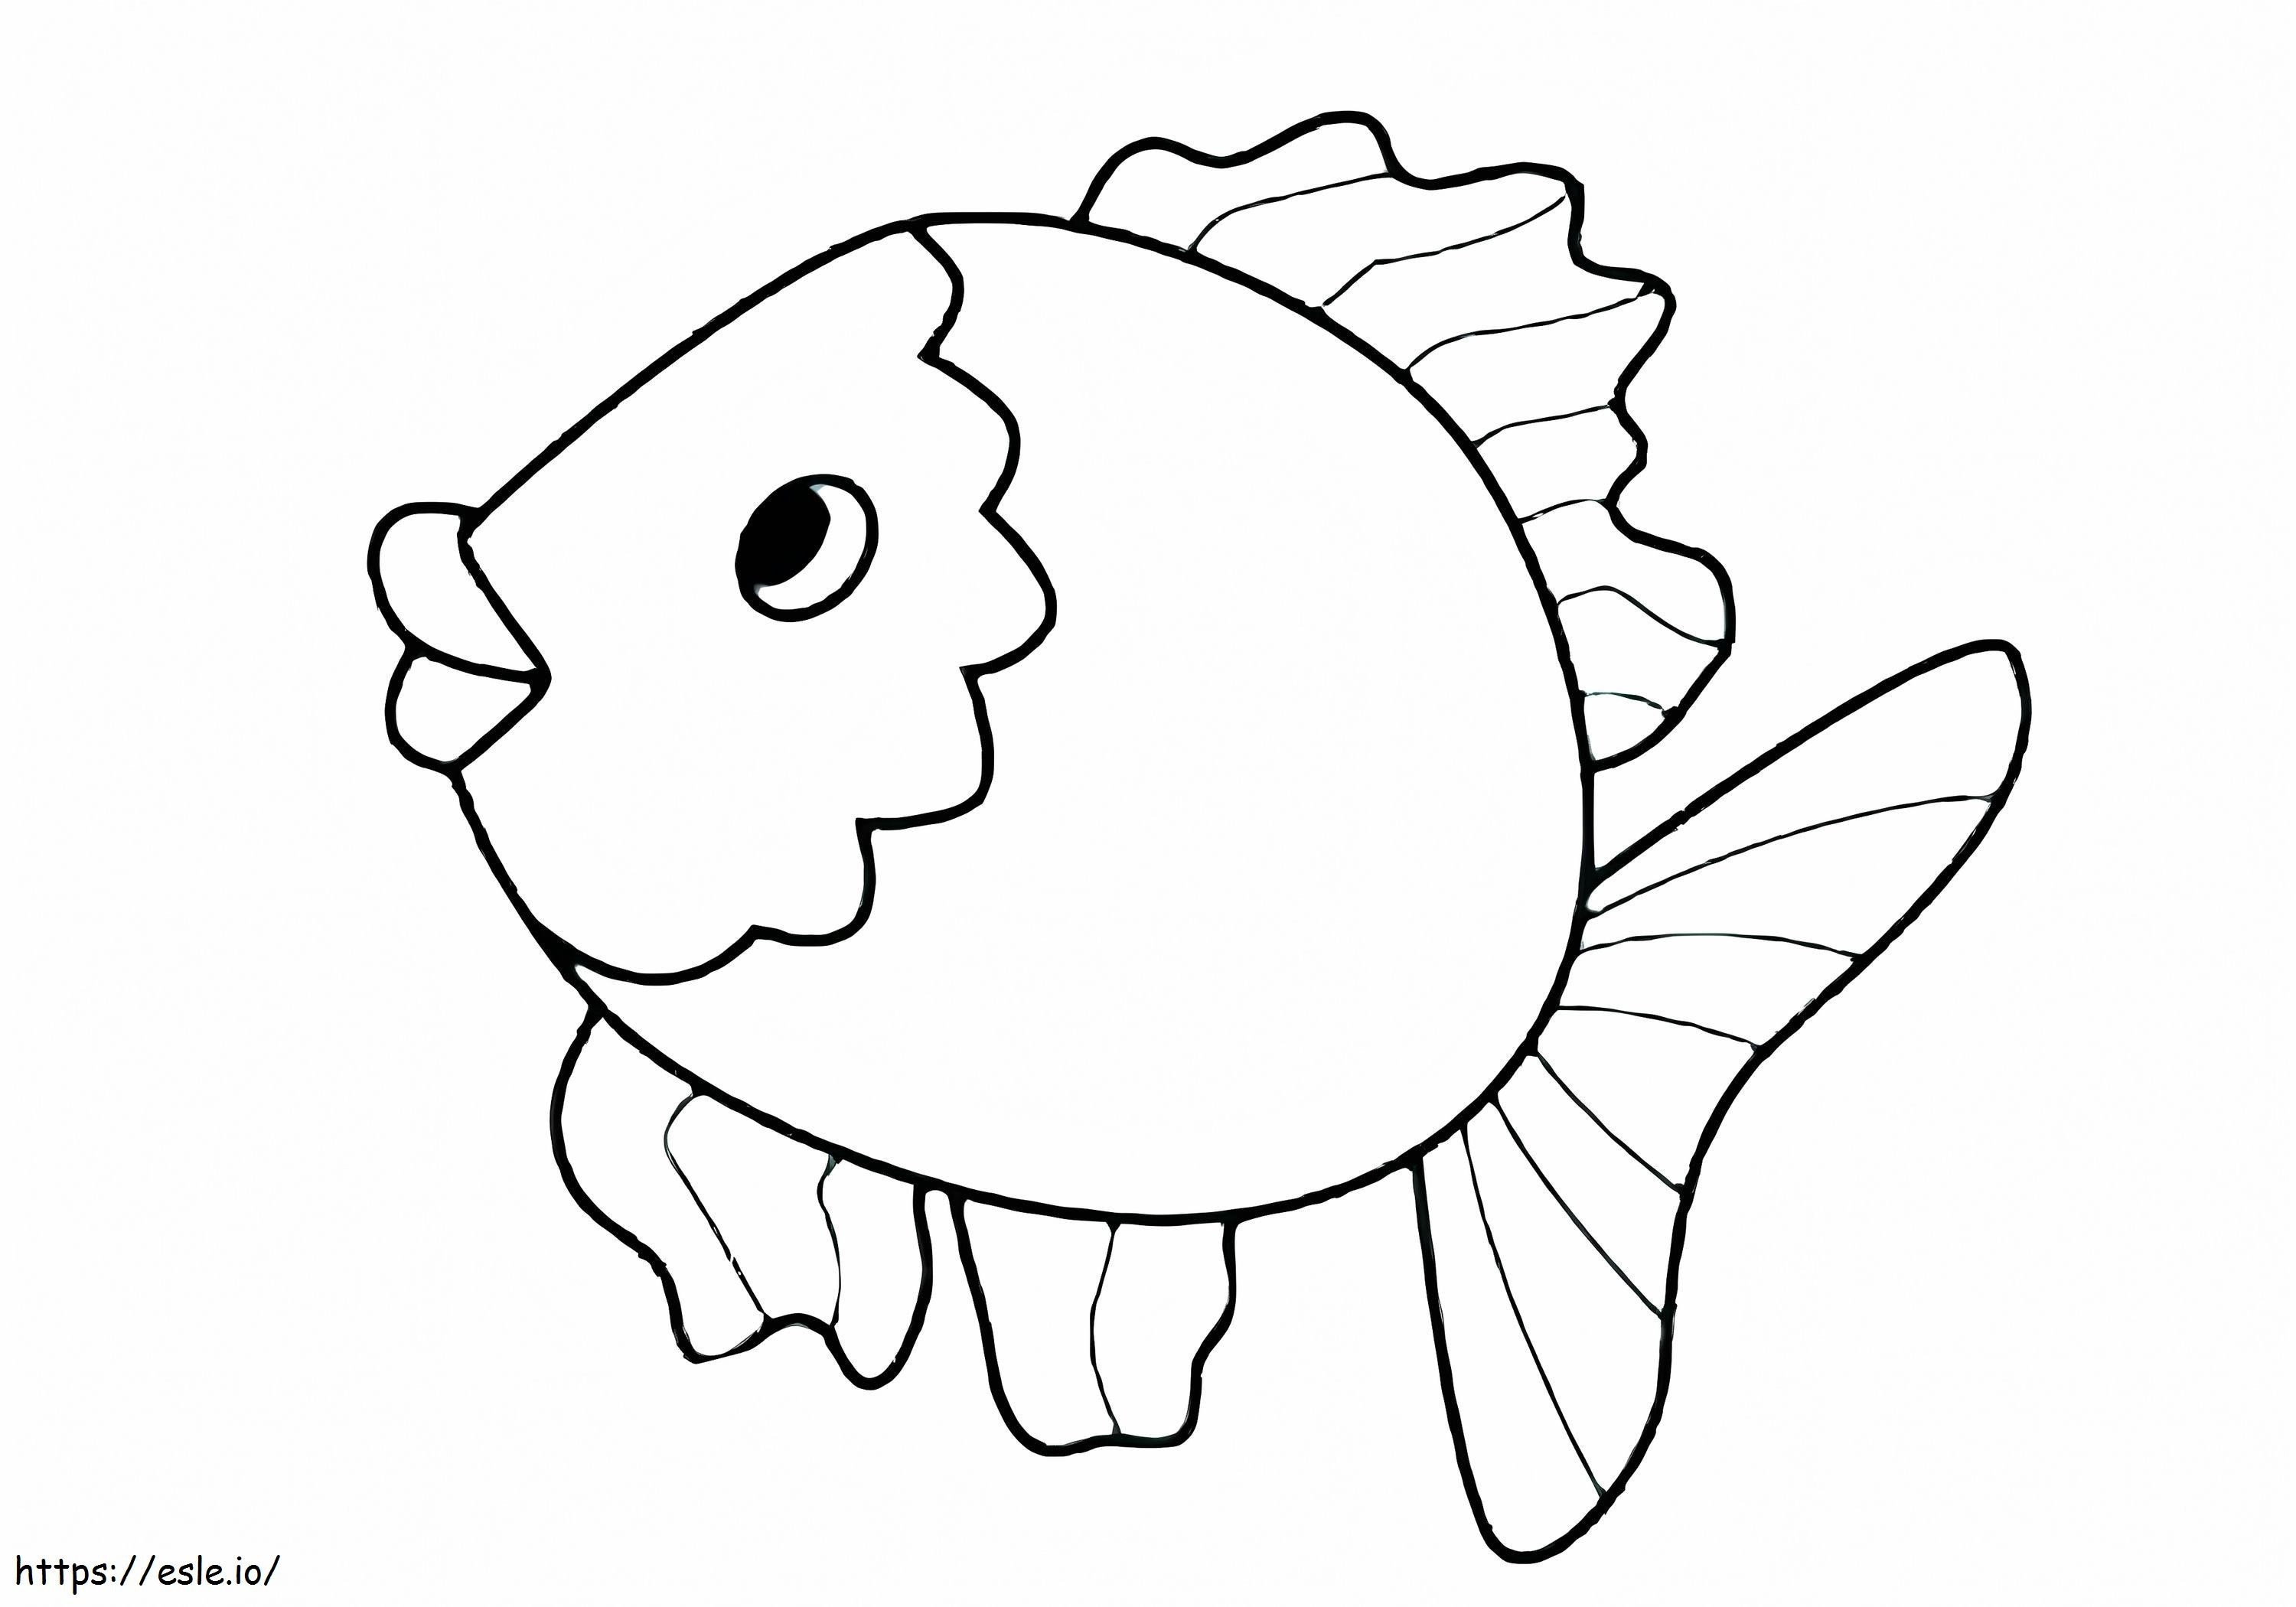 Awesome Fish coloring page